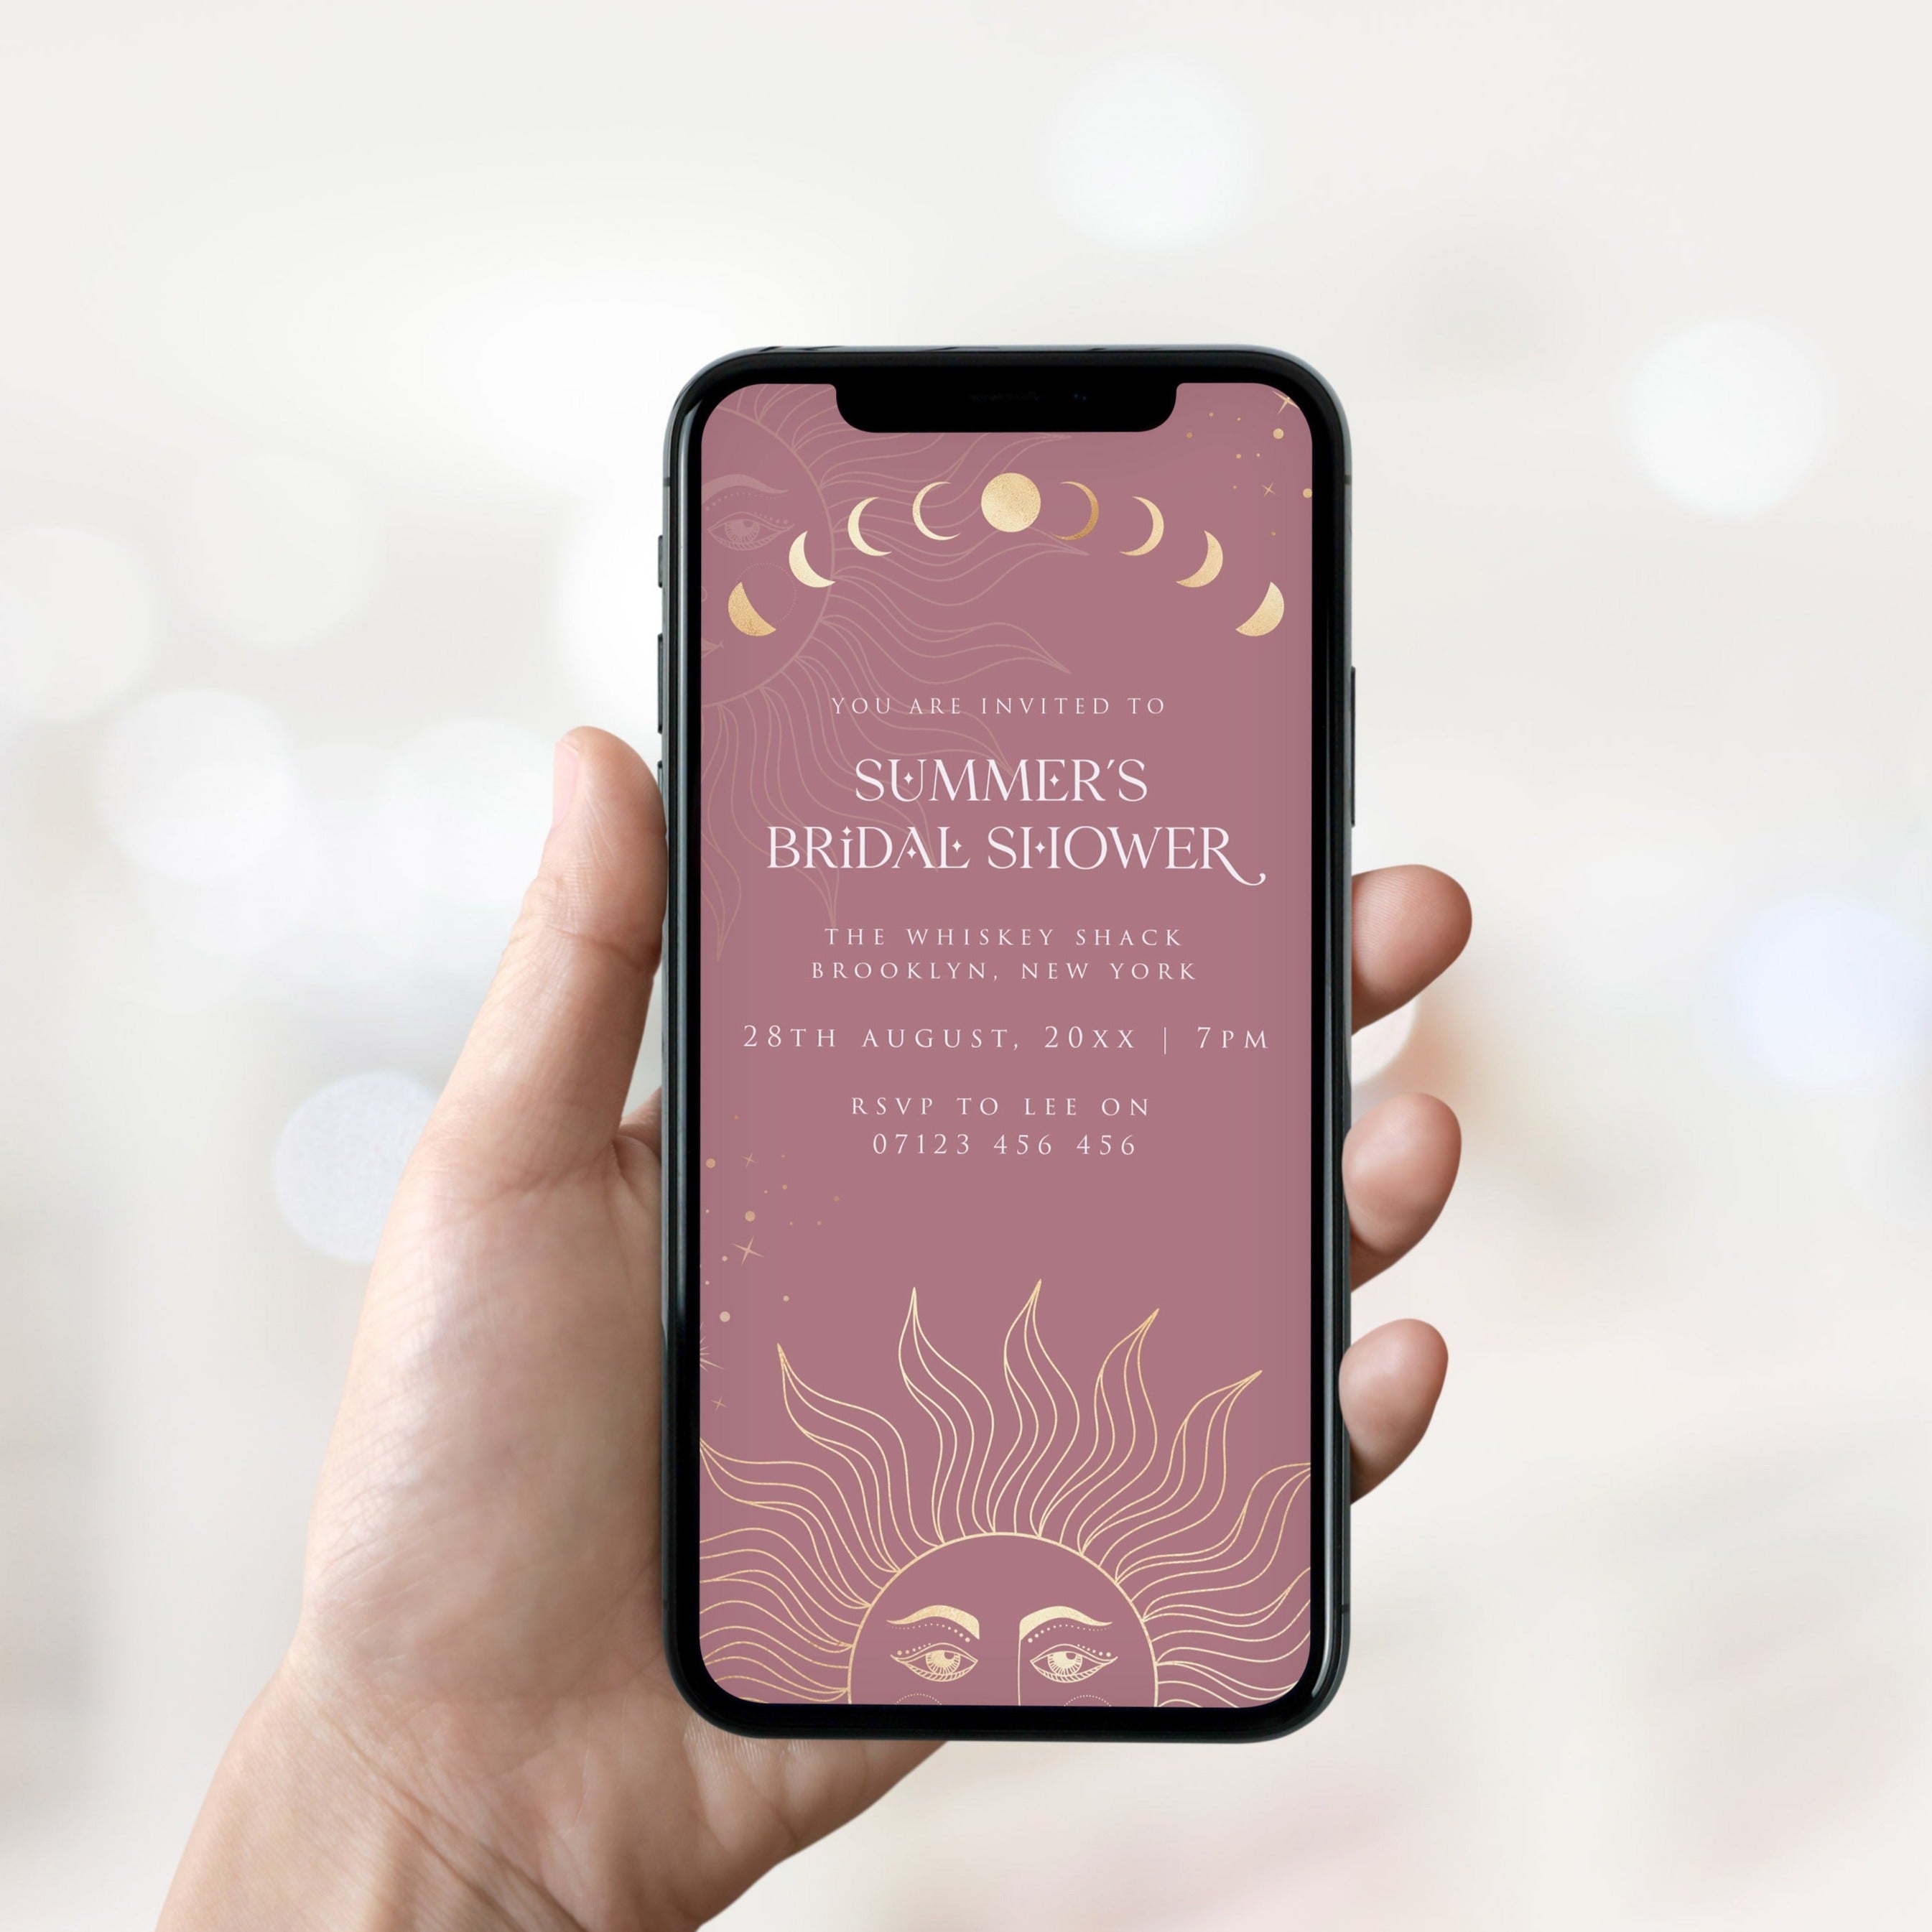 Fully editable and printable bridal shower mobile invitation with a celestial design. Perfect for a celestial bridal shower themed party